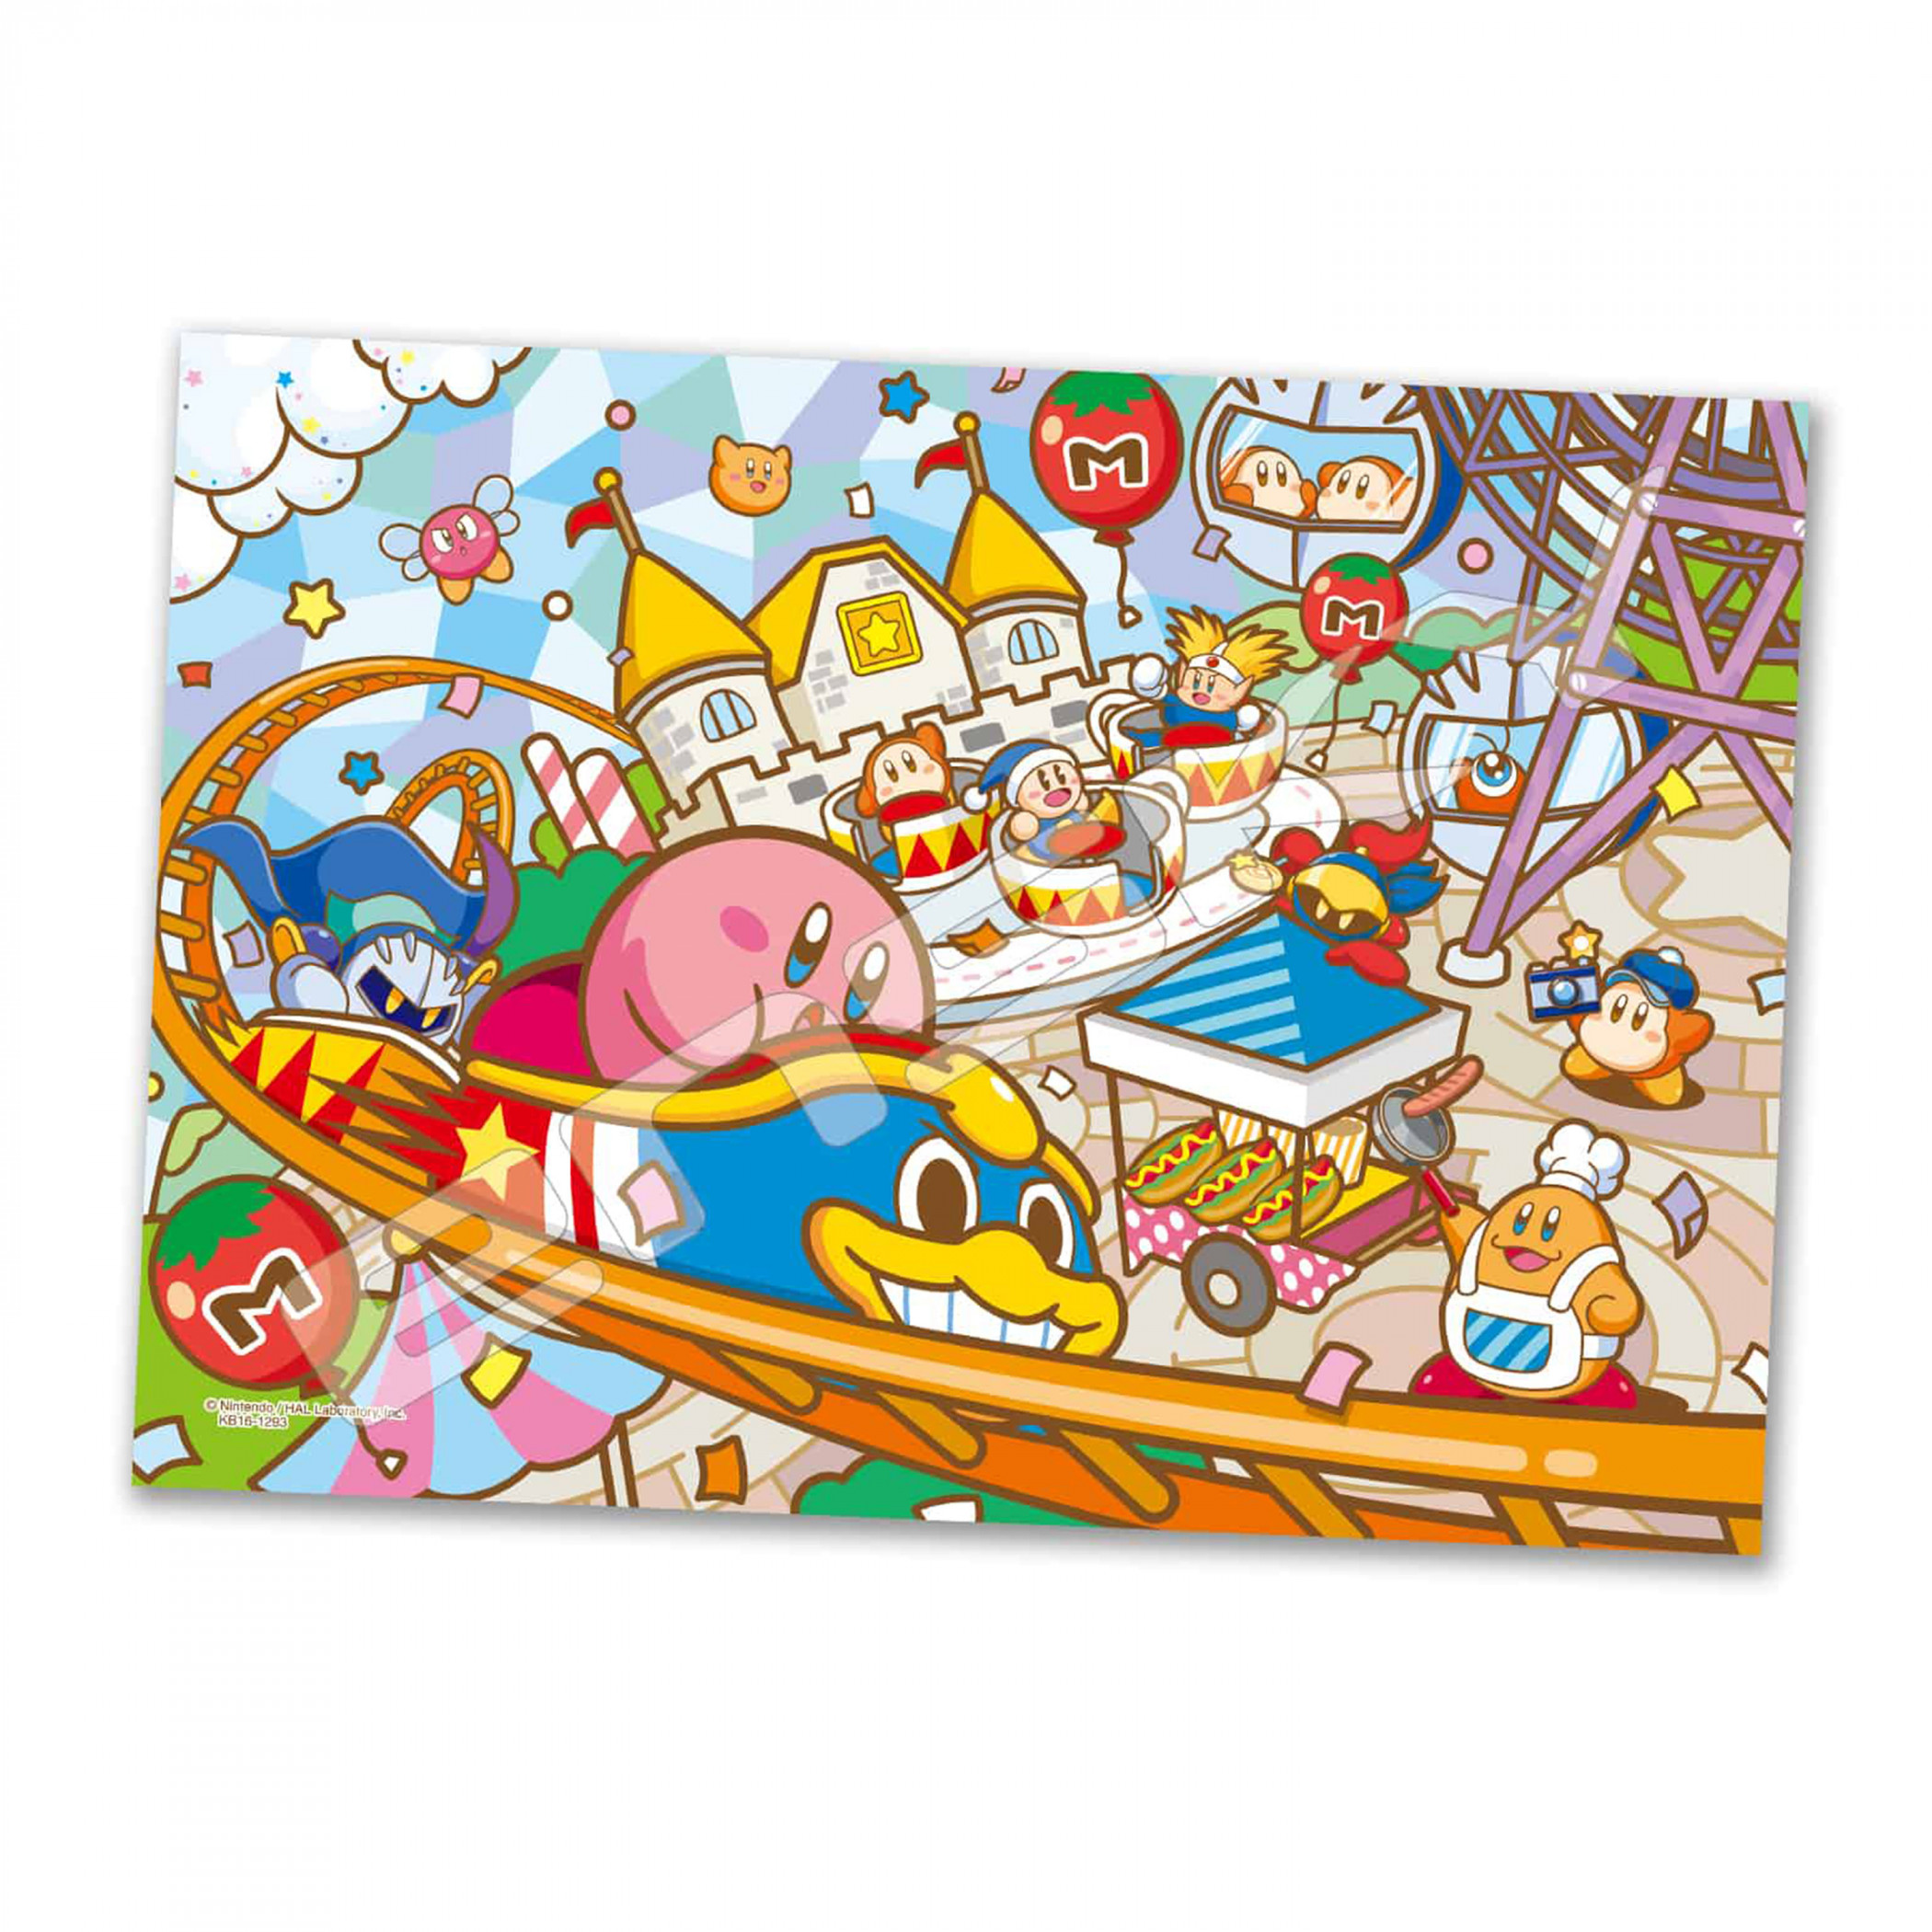 Kirby Pupupu Park Roller Coaster Party Art Crystal 208 Piece Puzzle